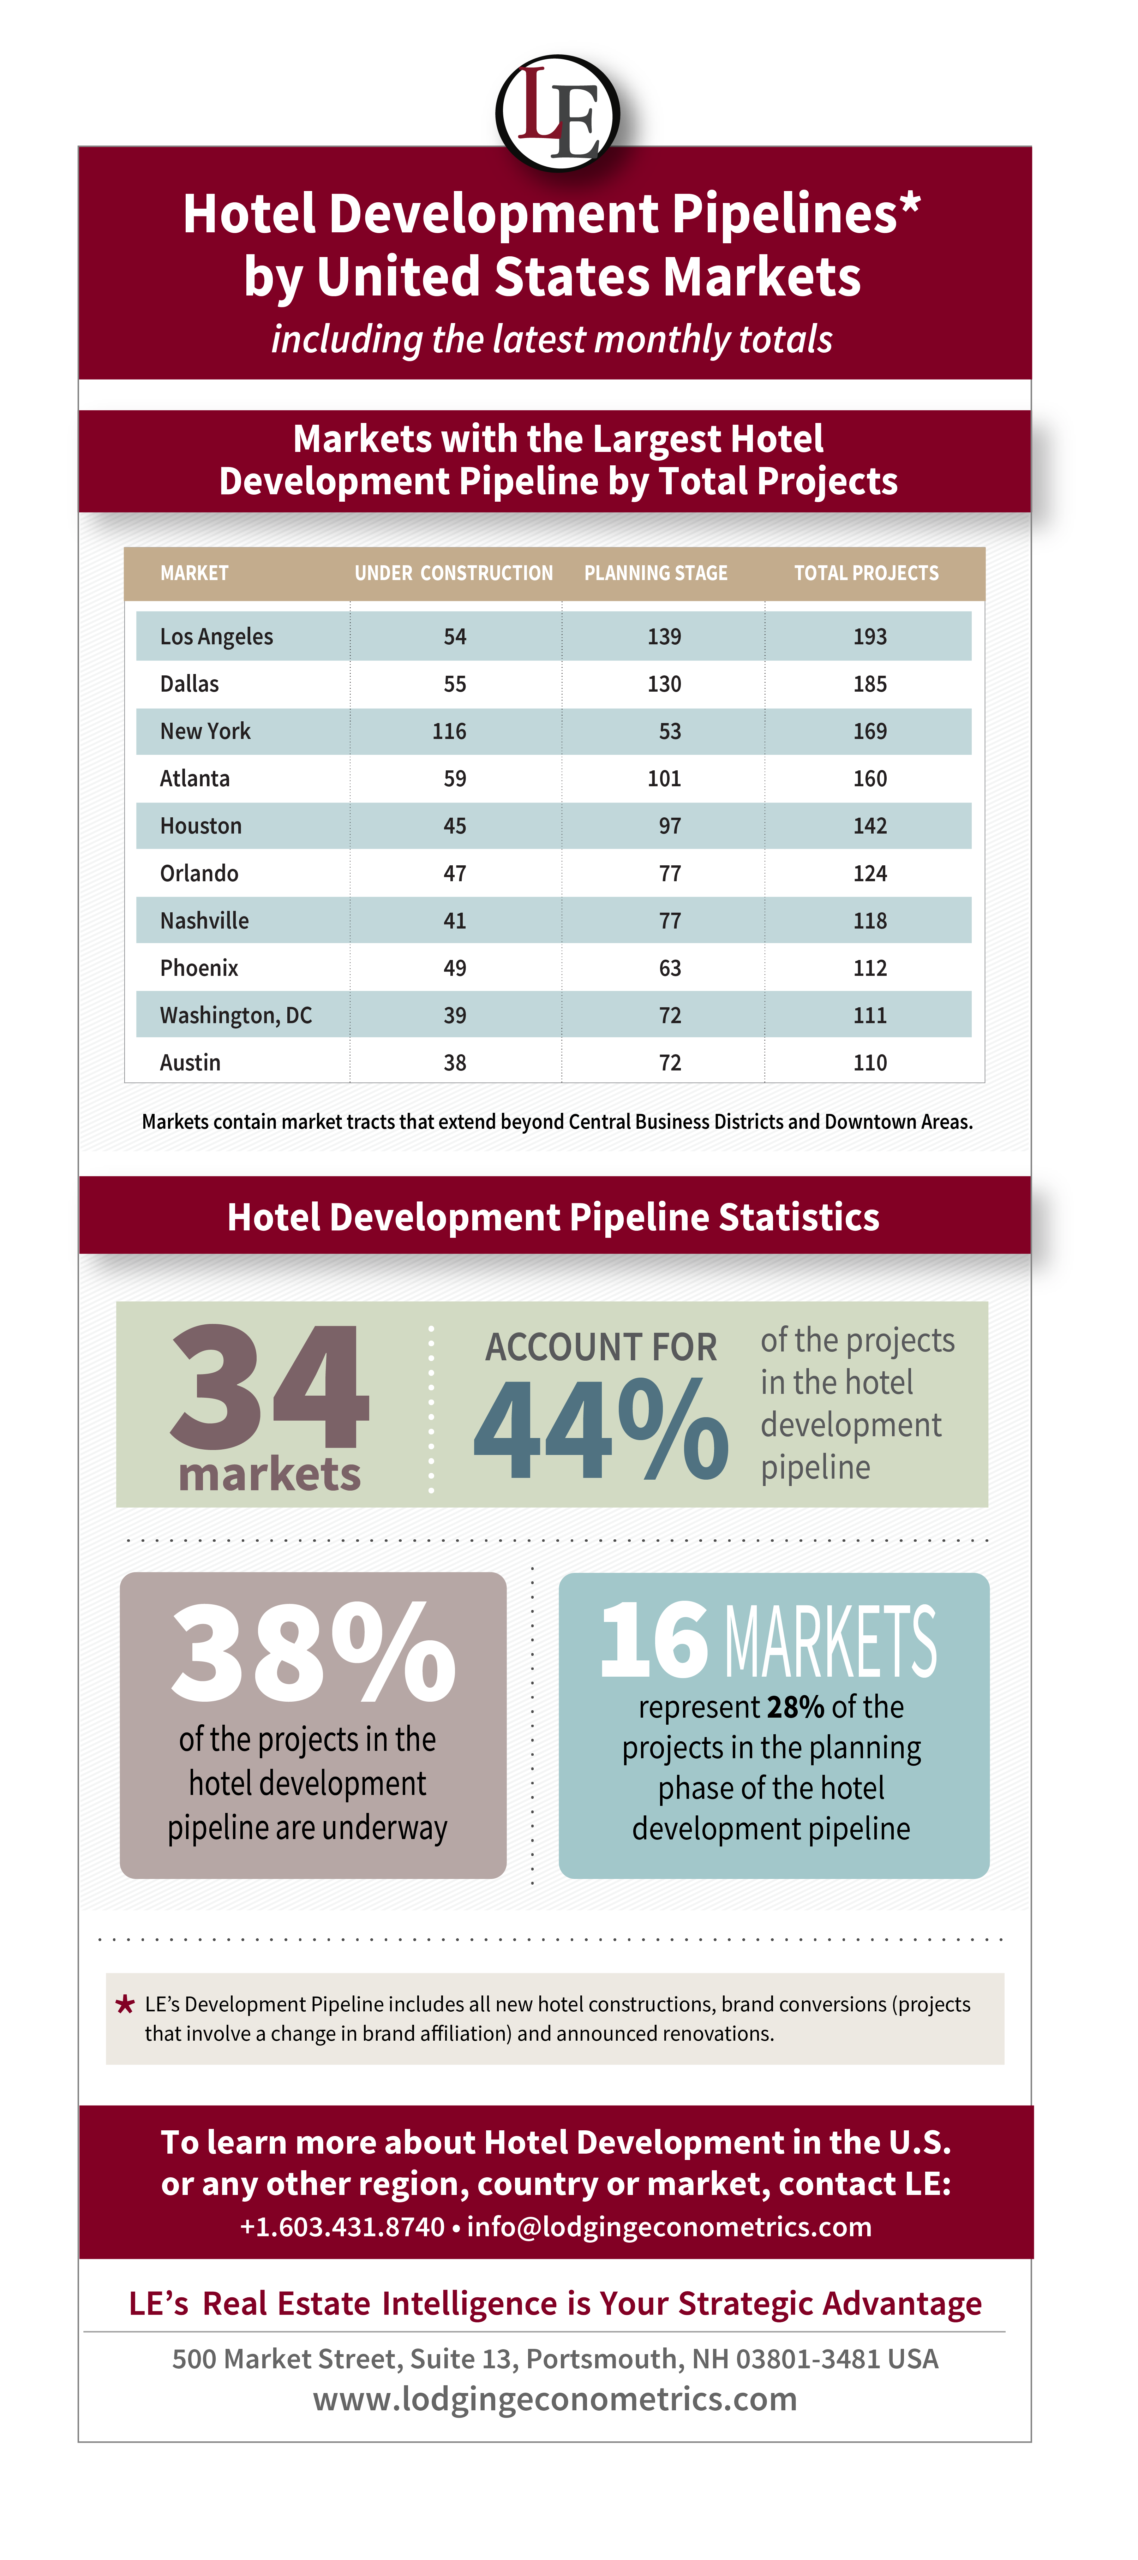 Lodging Econometrics—Hotel Development Pipelines* by United States Markets Including the Latest Monthly Totals